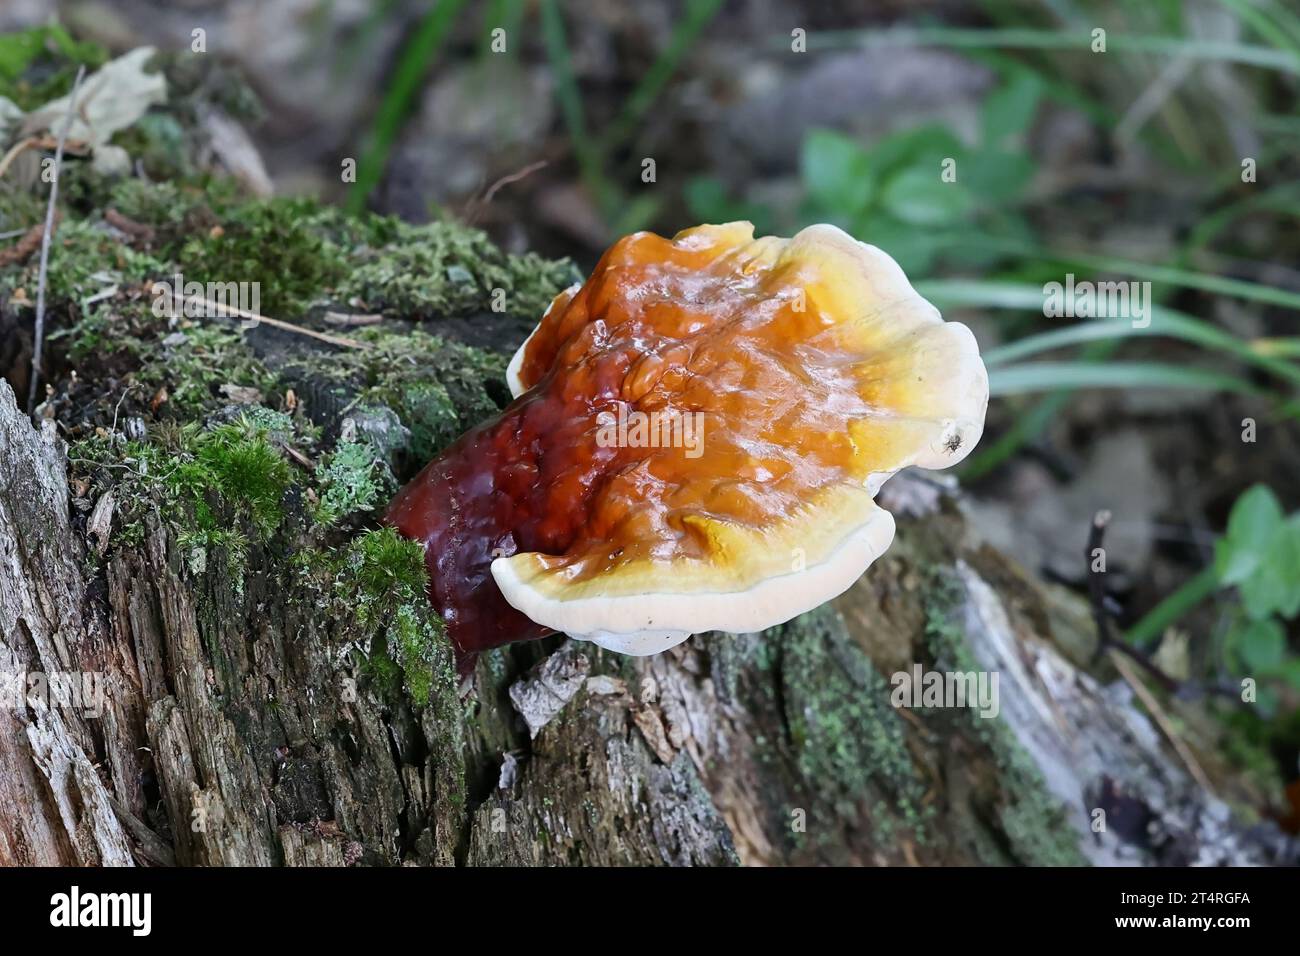 Ganoderma lucidum, commonly known as the lingzhi or reishi mushroom, very traditional medicinal fungus growing wild in Finland Stock Photo